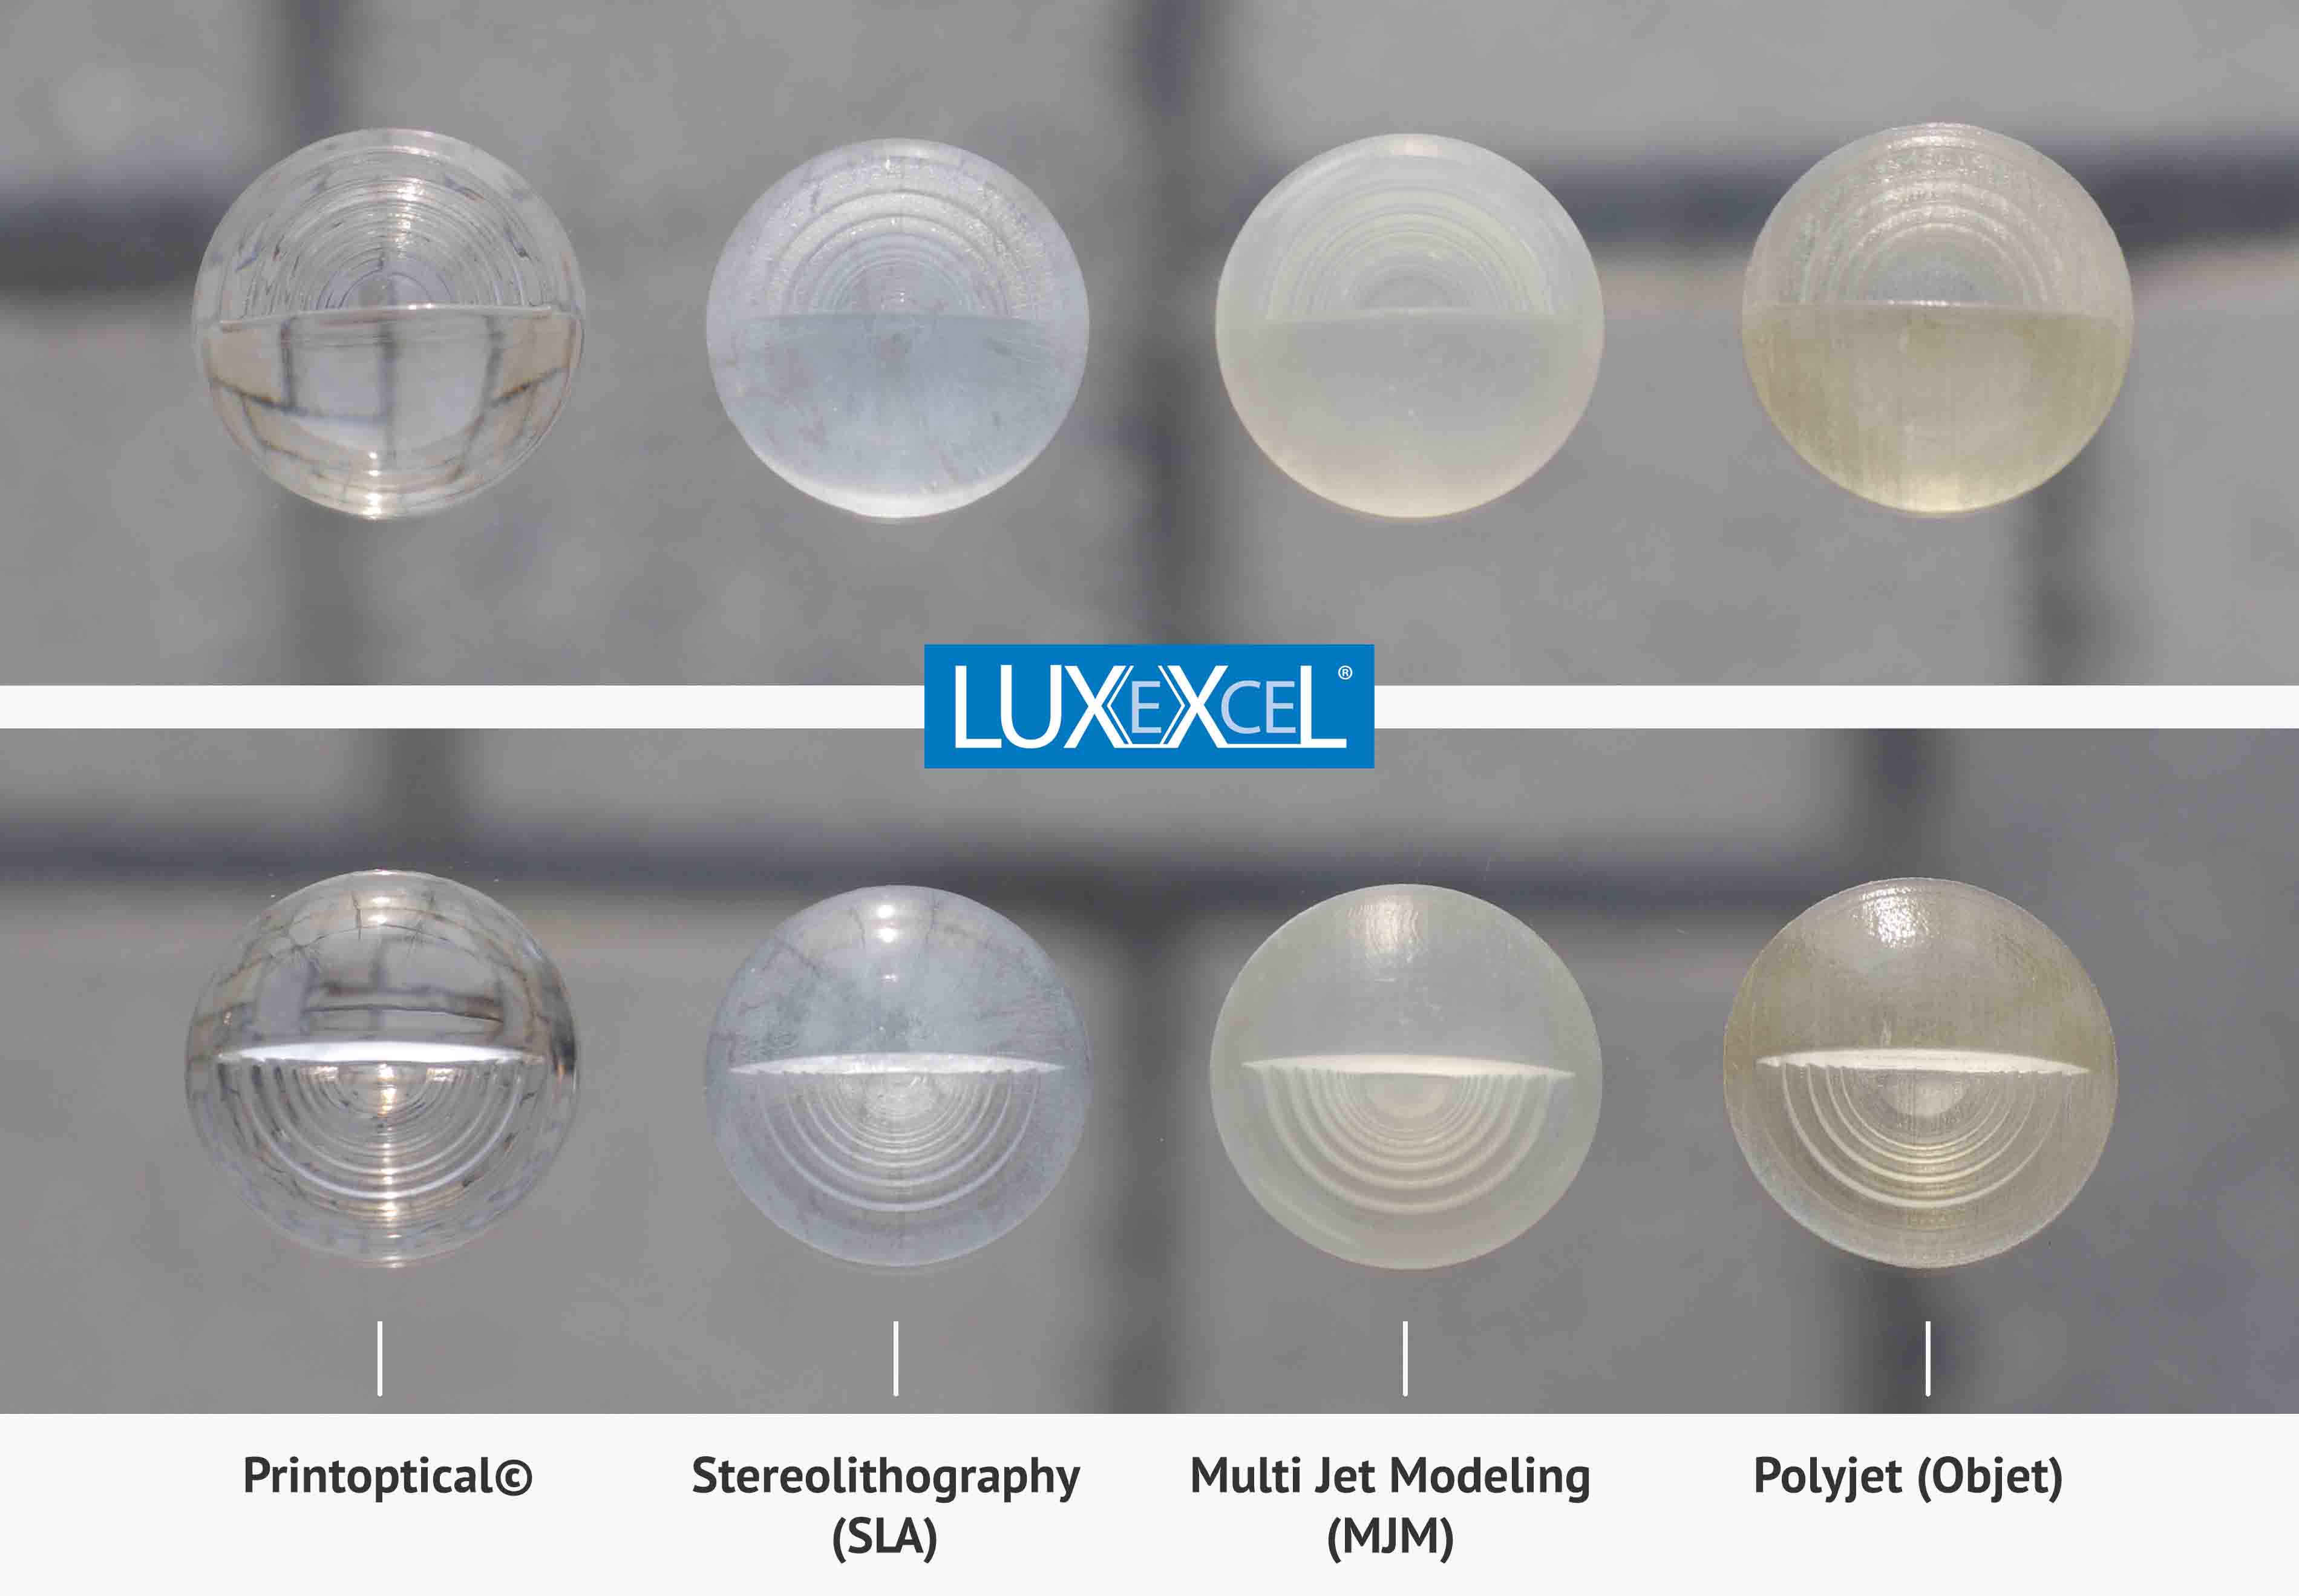 3D printing in optics by LUXeXcel and OPTIS